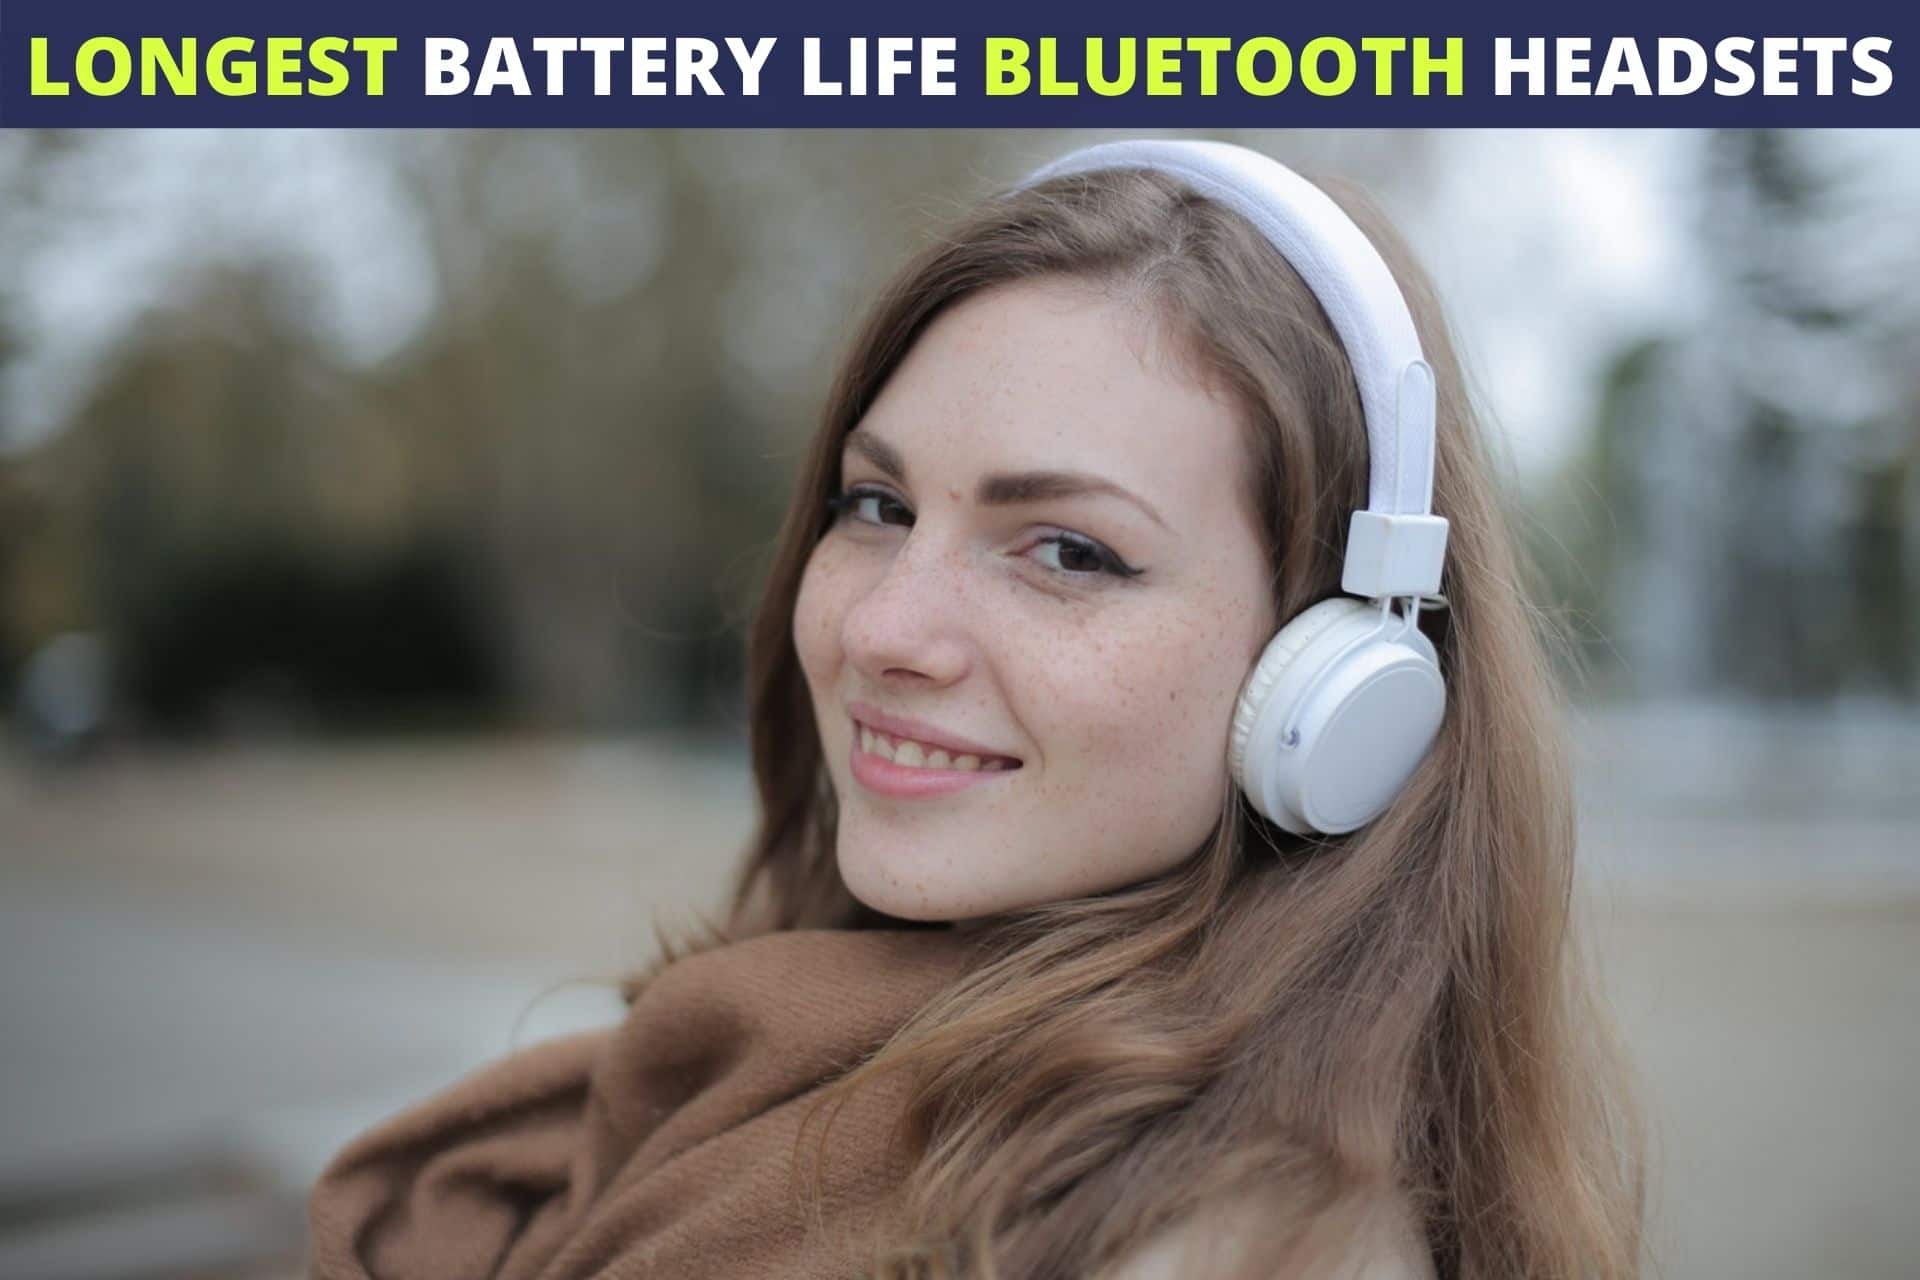 The Longest Battery Life Bluetooth Headset That Most People Own